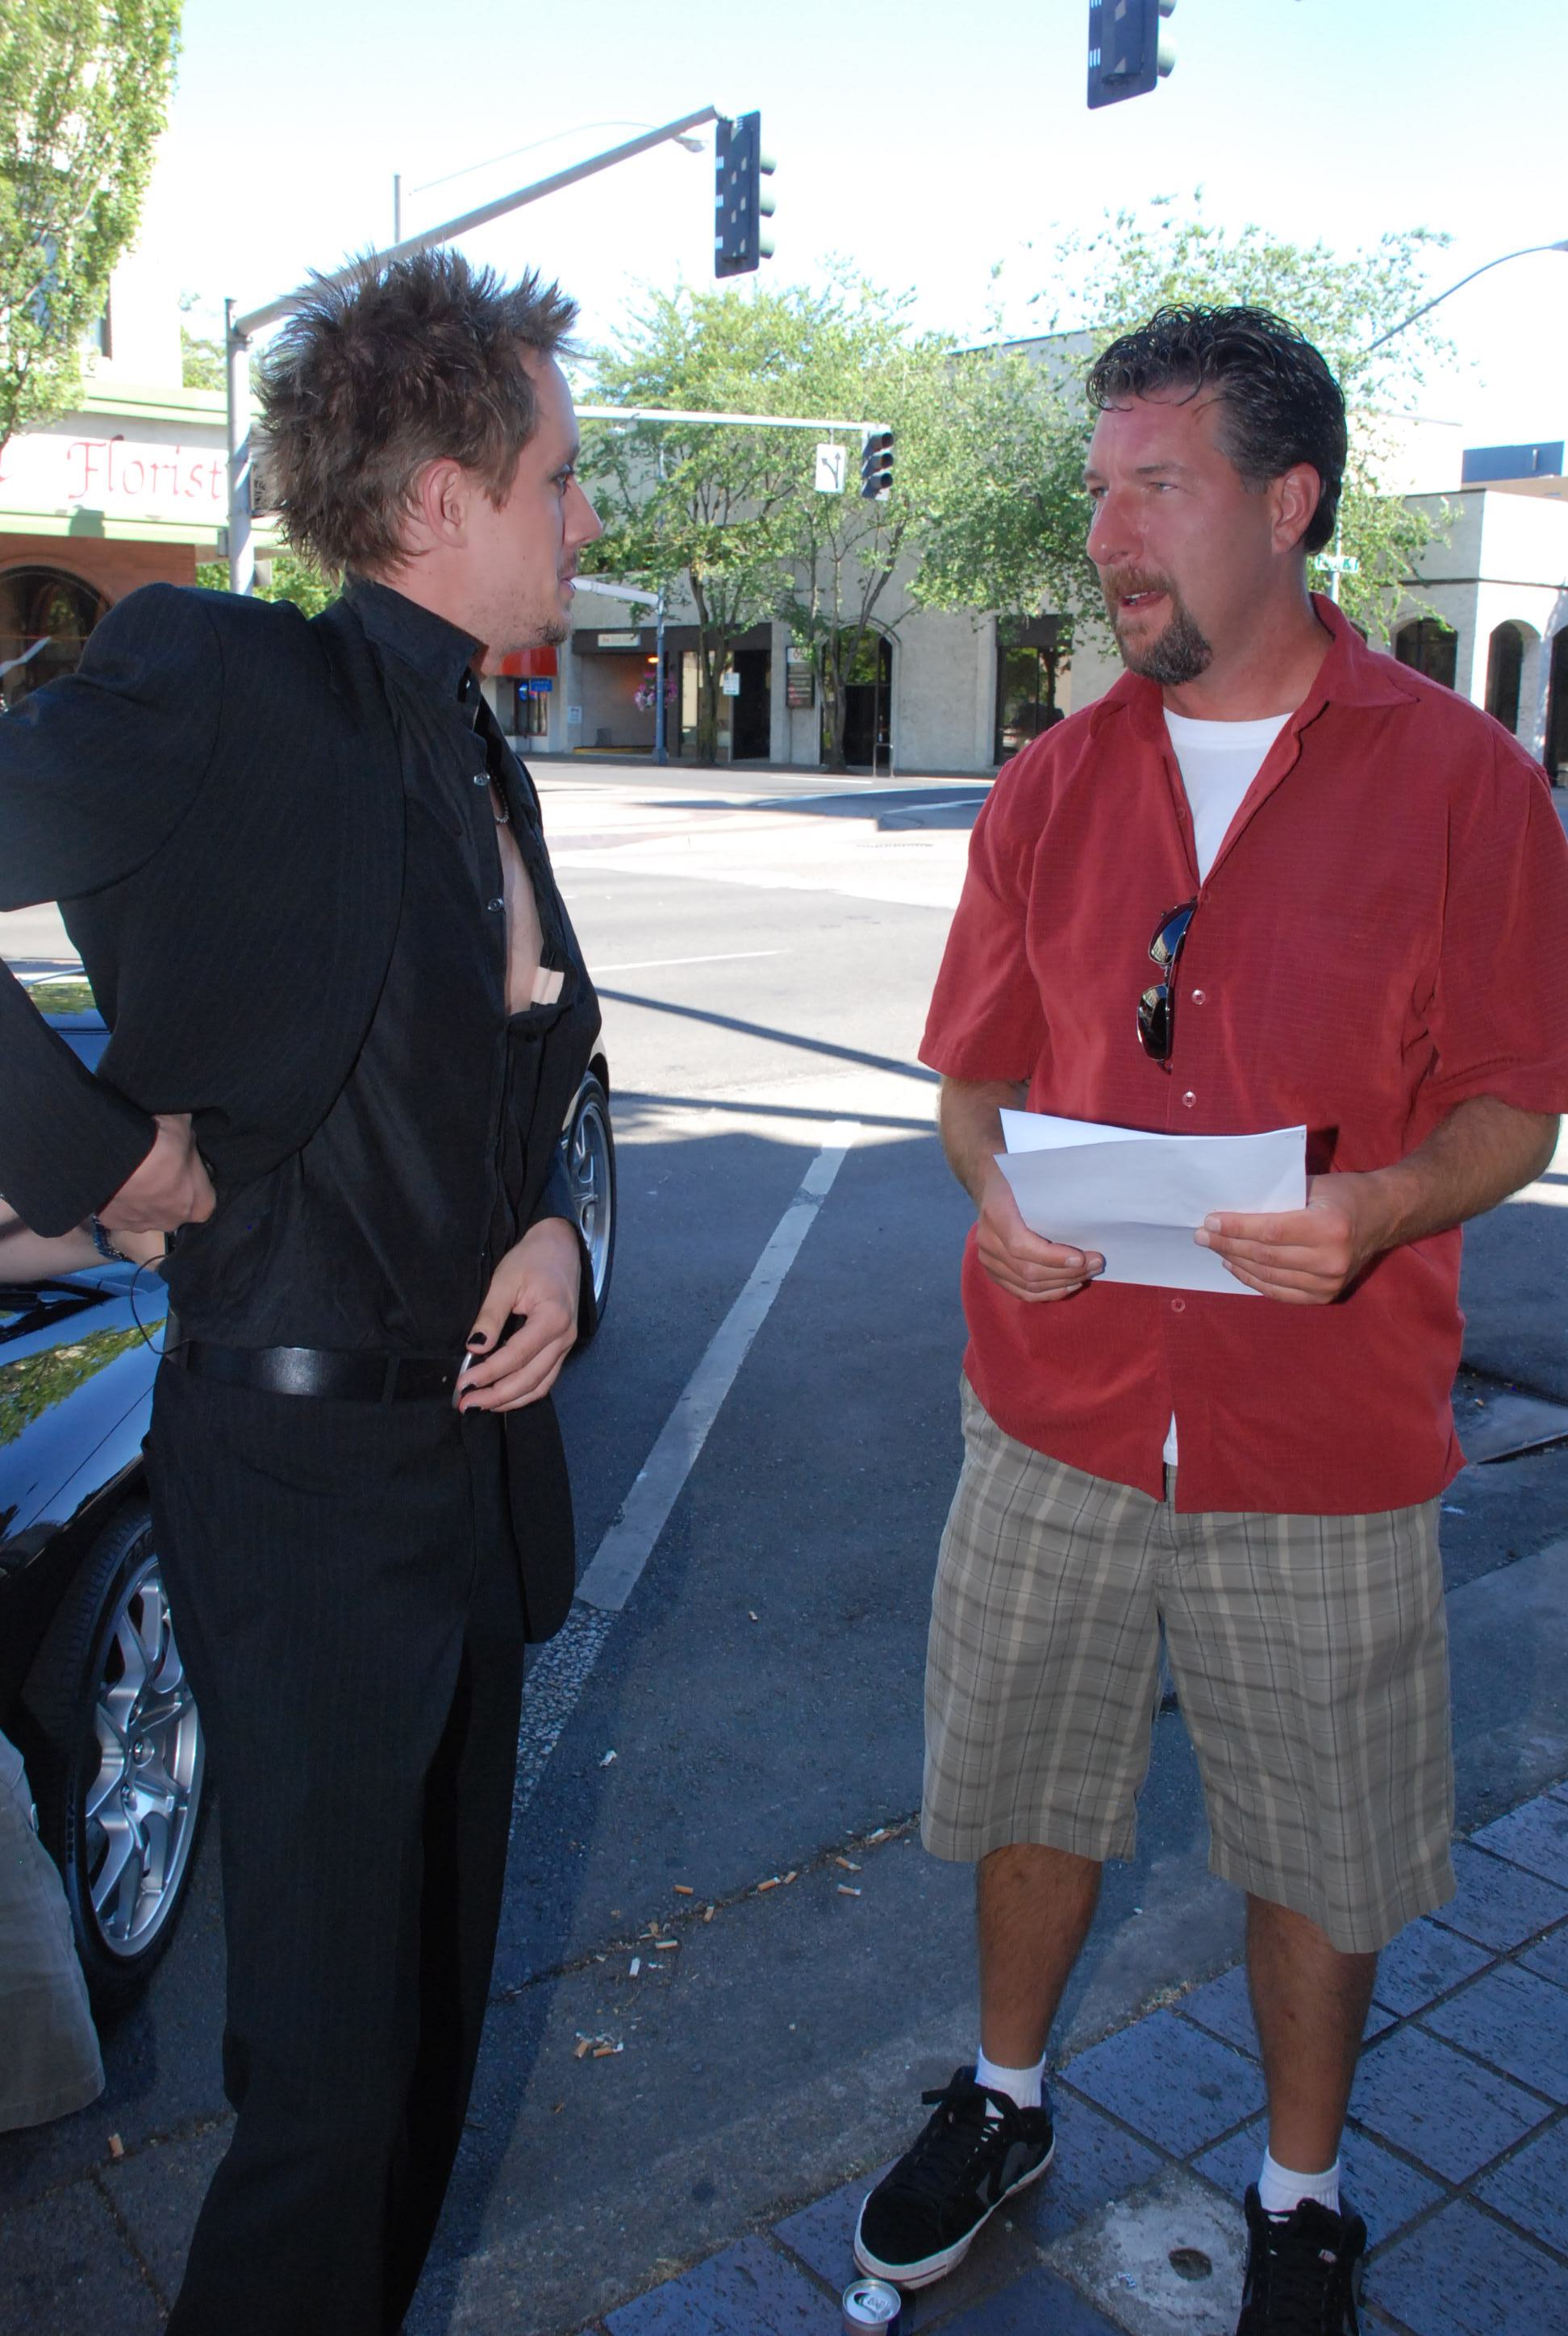 Rob and Chad Lindberg going over shot in Downtown Salem, Oregon at the Brick.